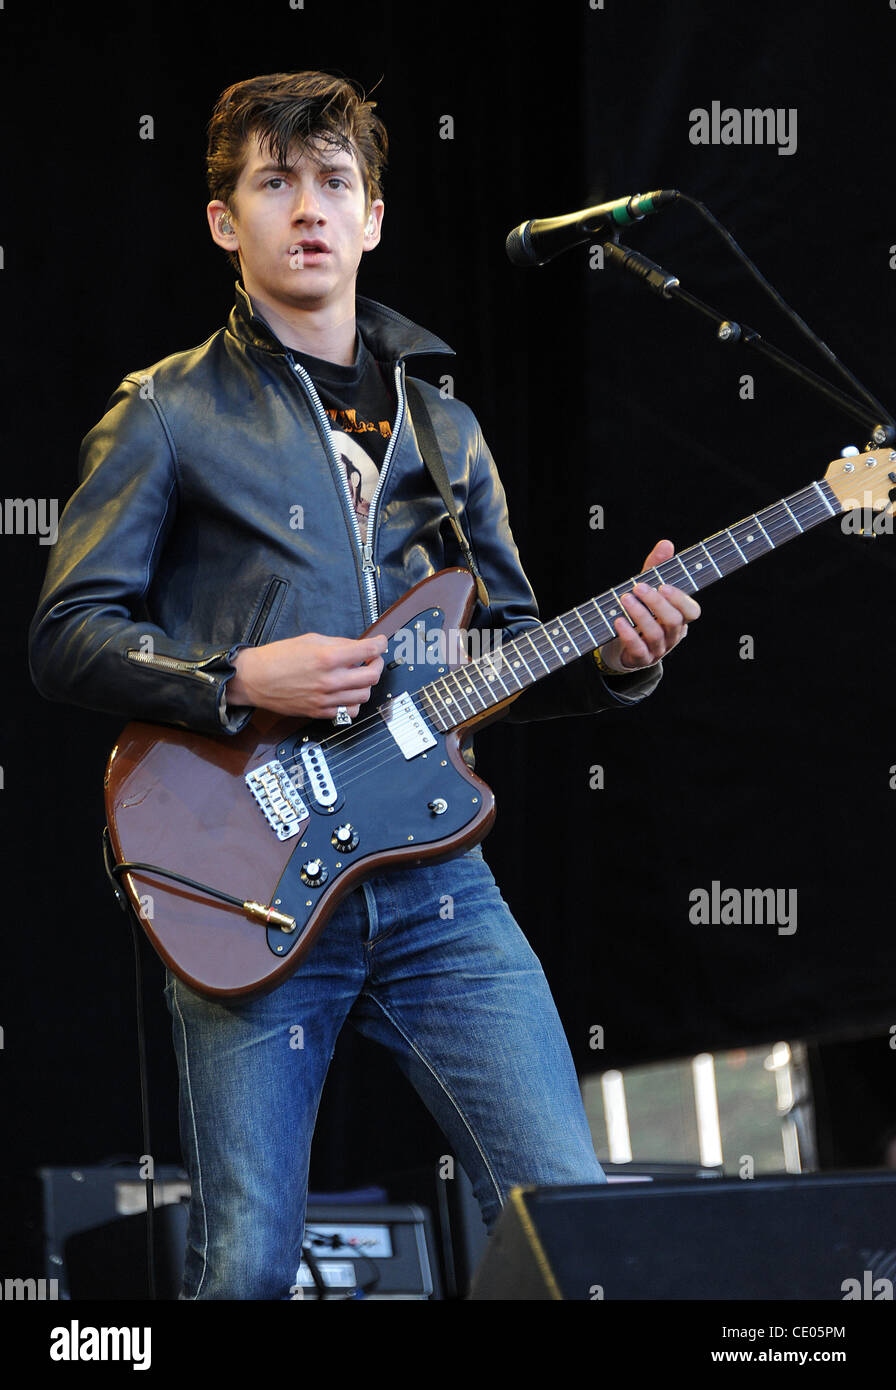 Aug 13, 2011 - San Francisco, California; USA - Singer / Guitarist ALEX TURNER of the band Arctic Monkeys performs live as part of the 2011 Outside Lands Music Festival that is taking place at Golden Gate Park.  The three day festival will attract thousands of fans to see a variety of artist on six  Stock Photo